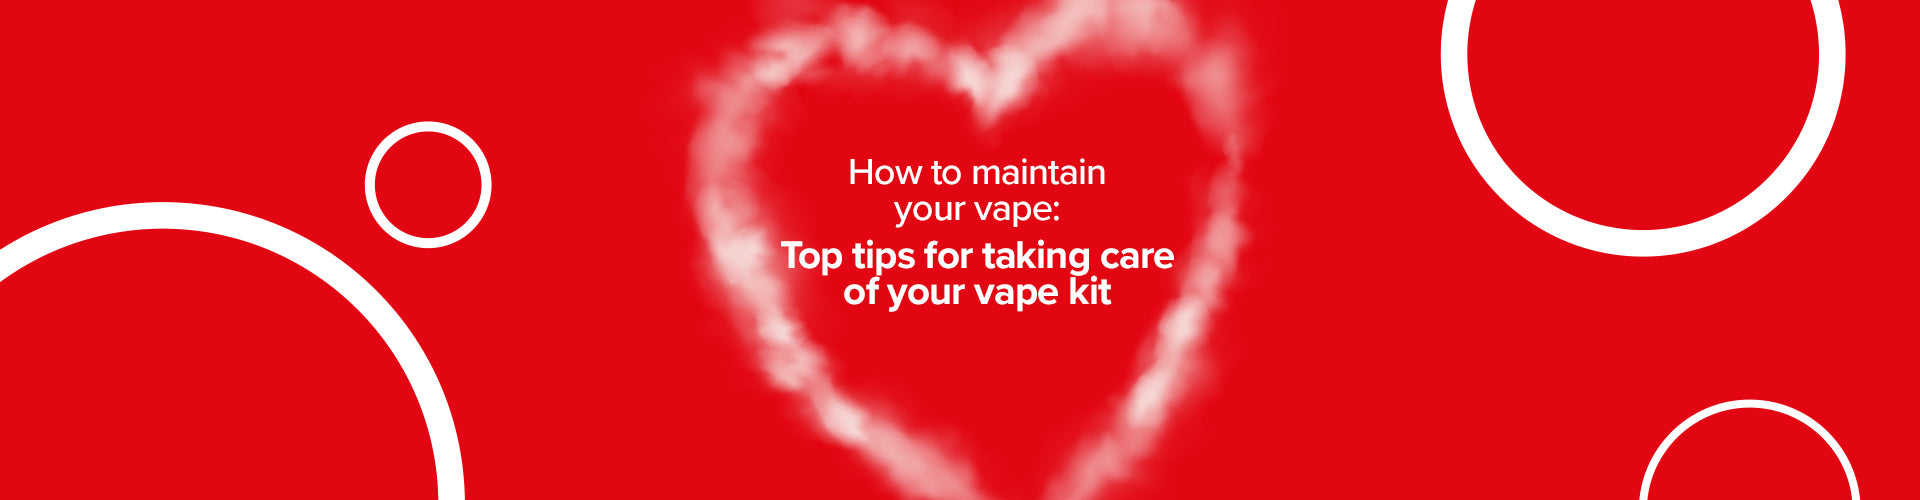 How to maintain your vape: Top tips for taking care of your vape kit